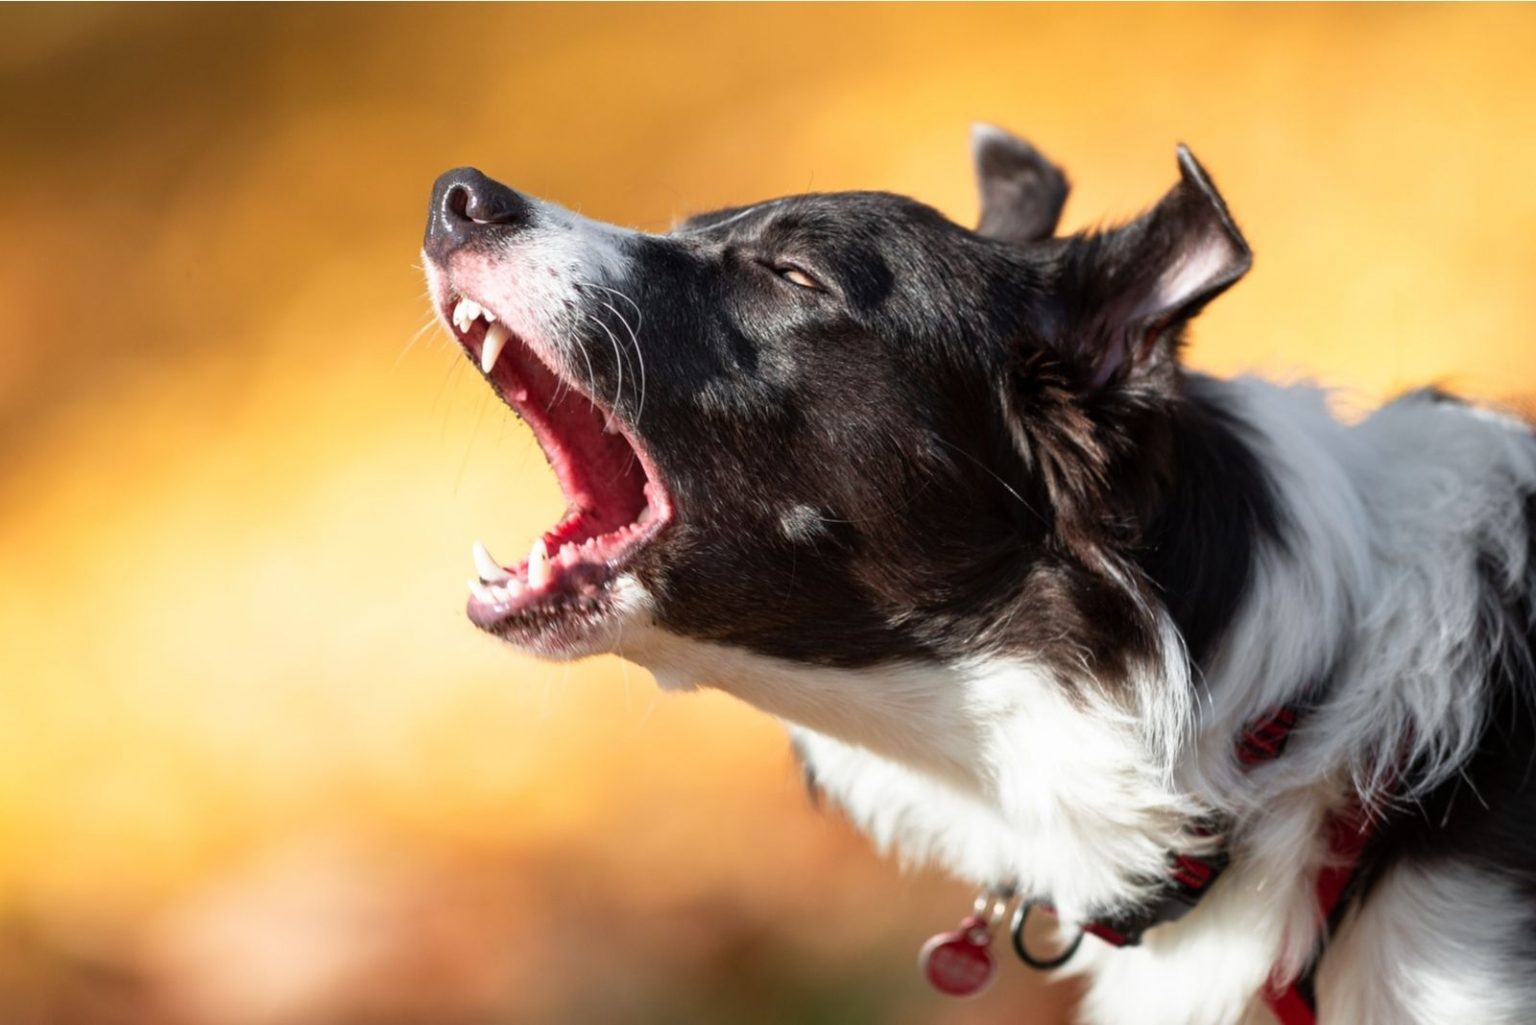 Are Border Collies Aggressive? How Do You Stop Their